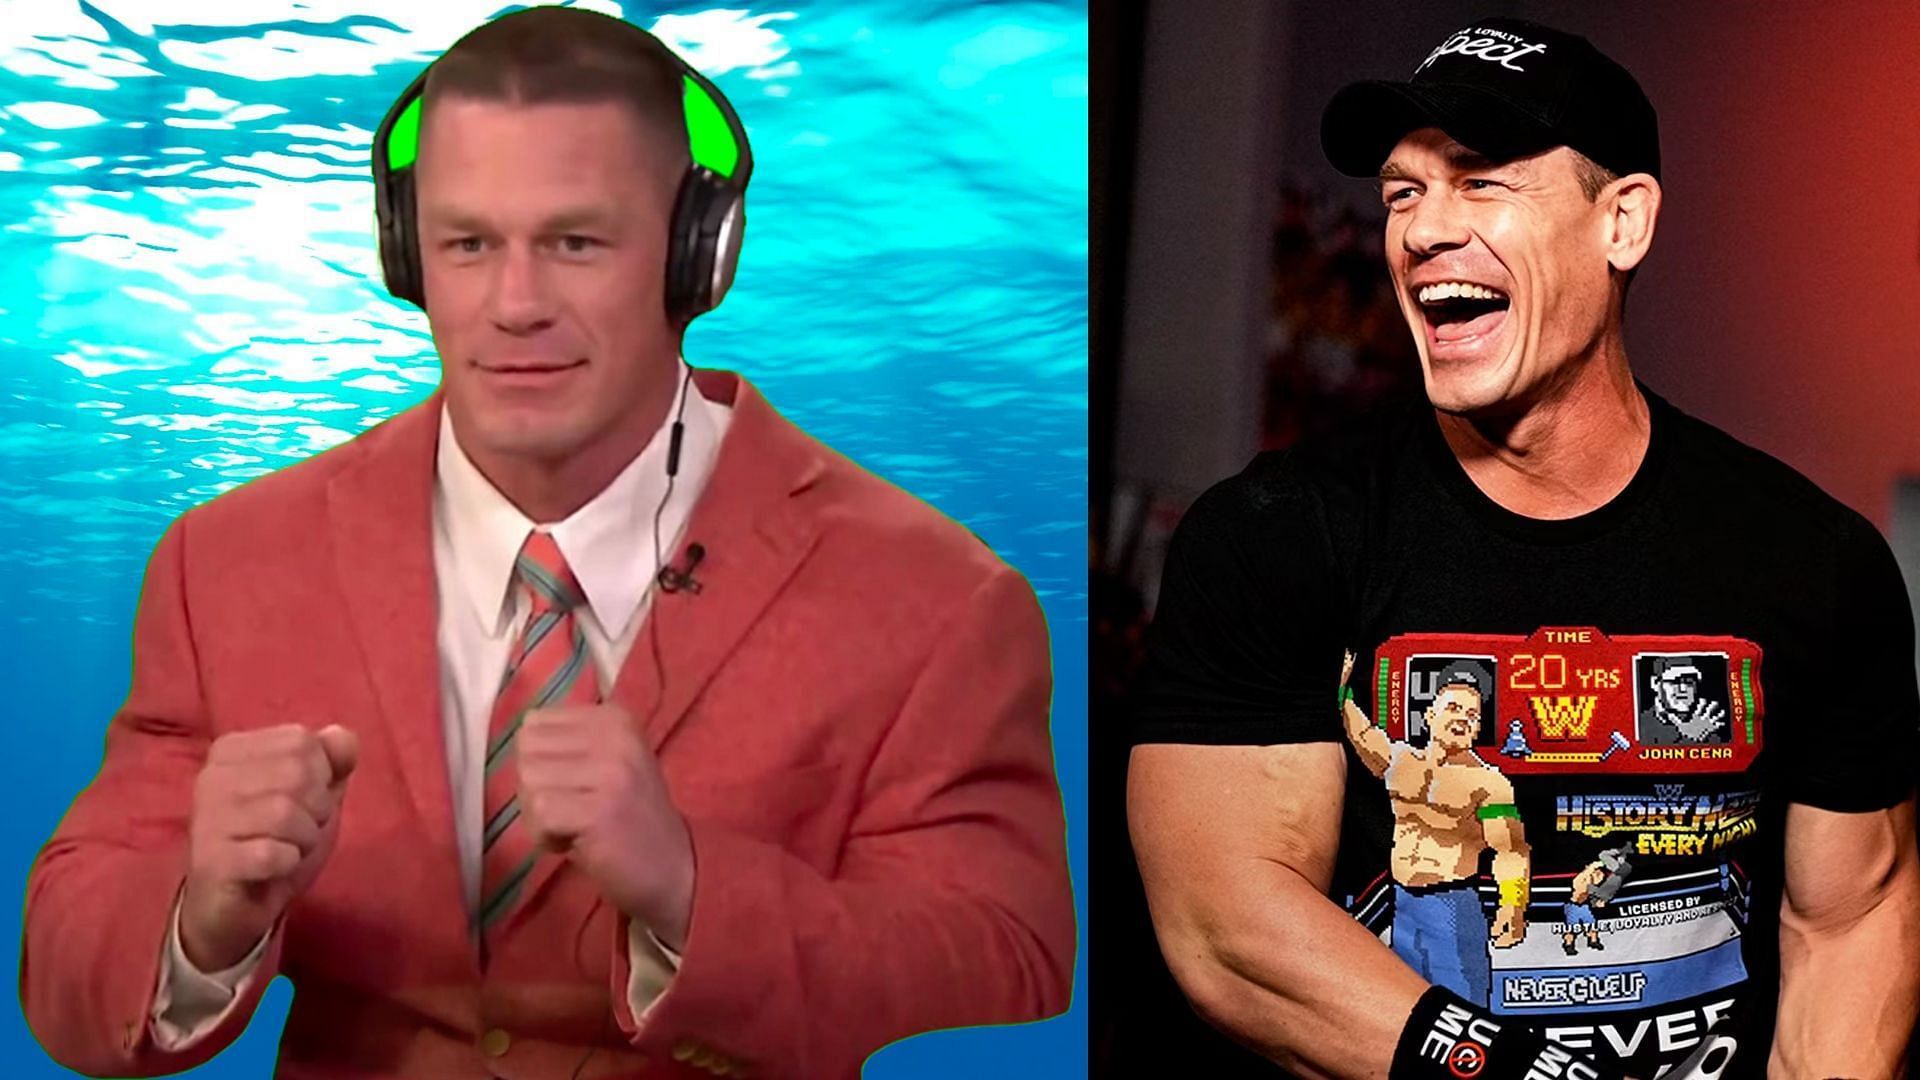 John Cena makes subtle reference to recent viral video at WWE